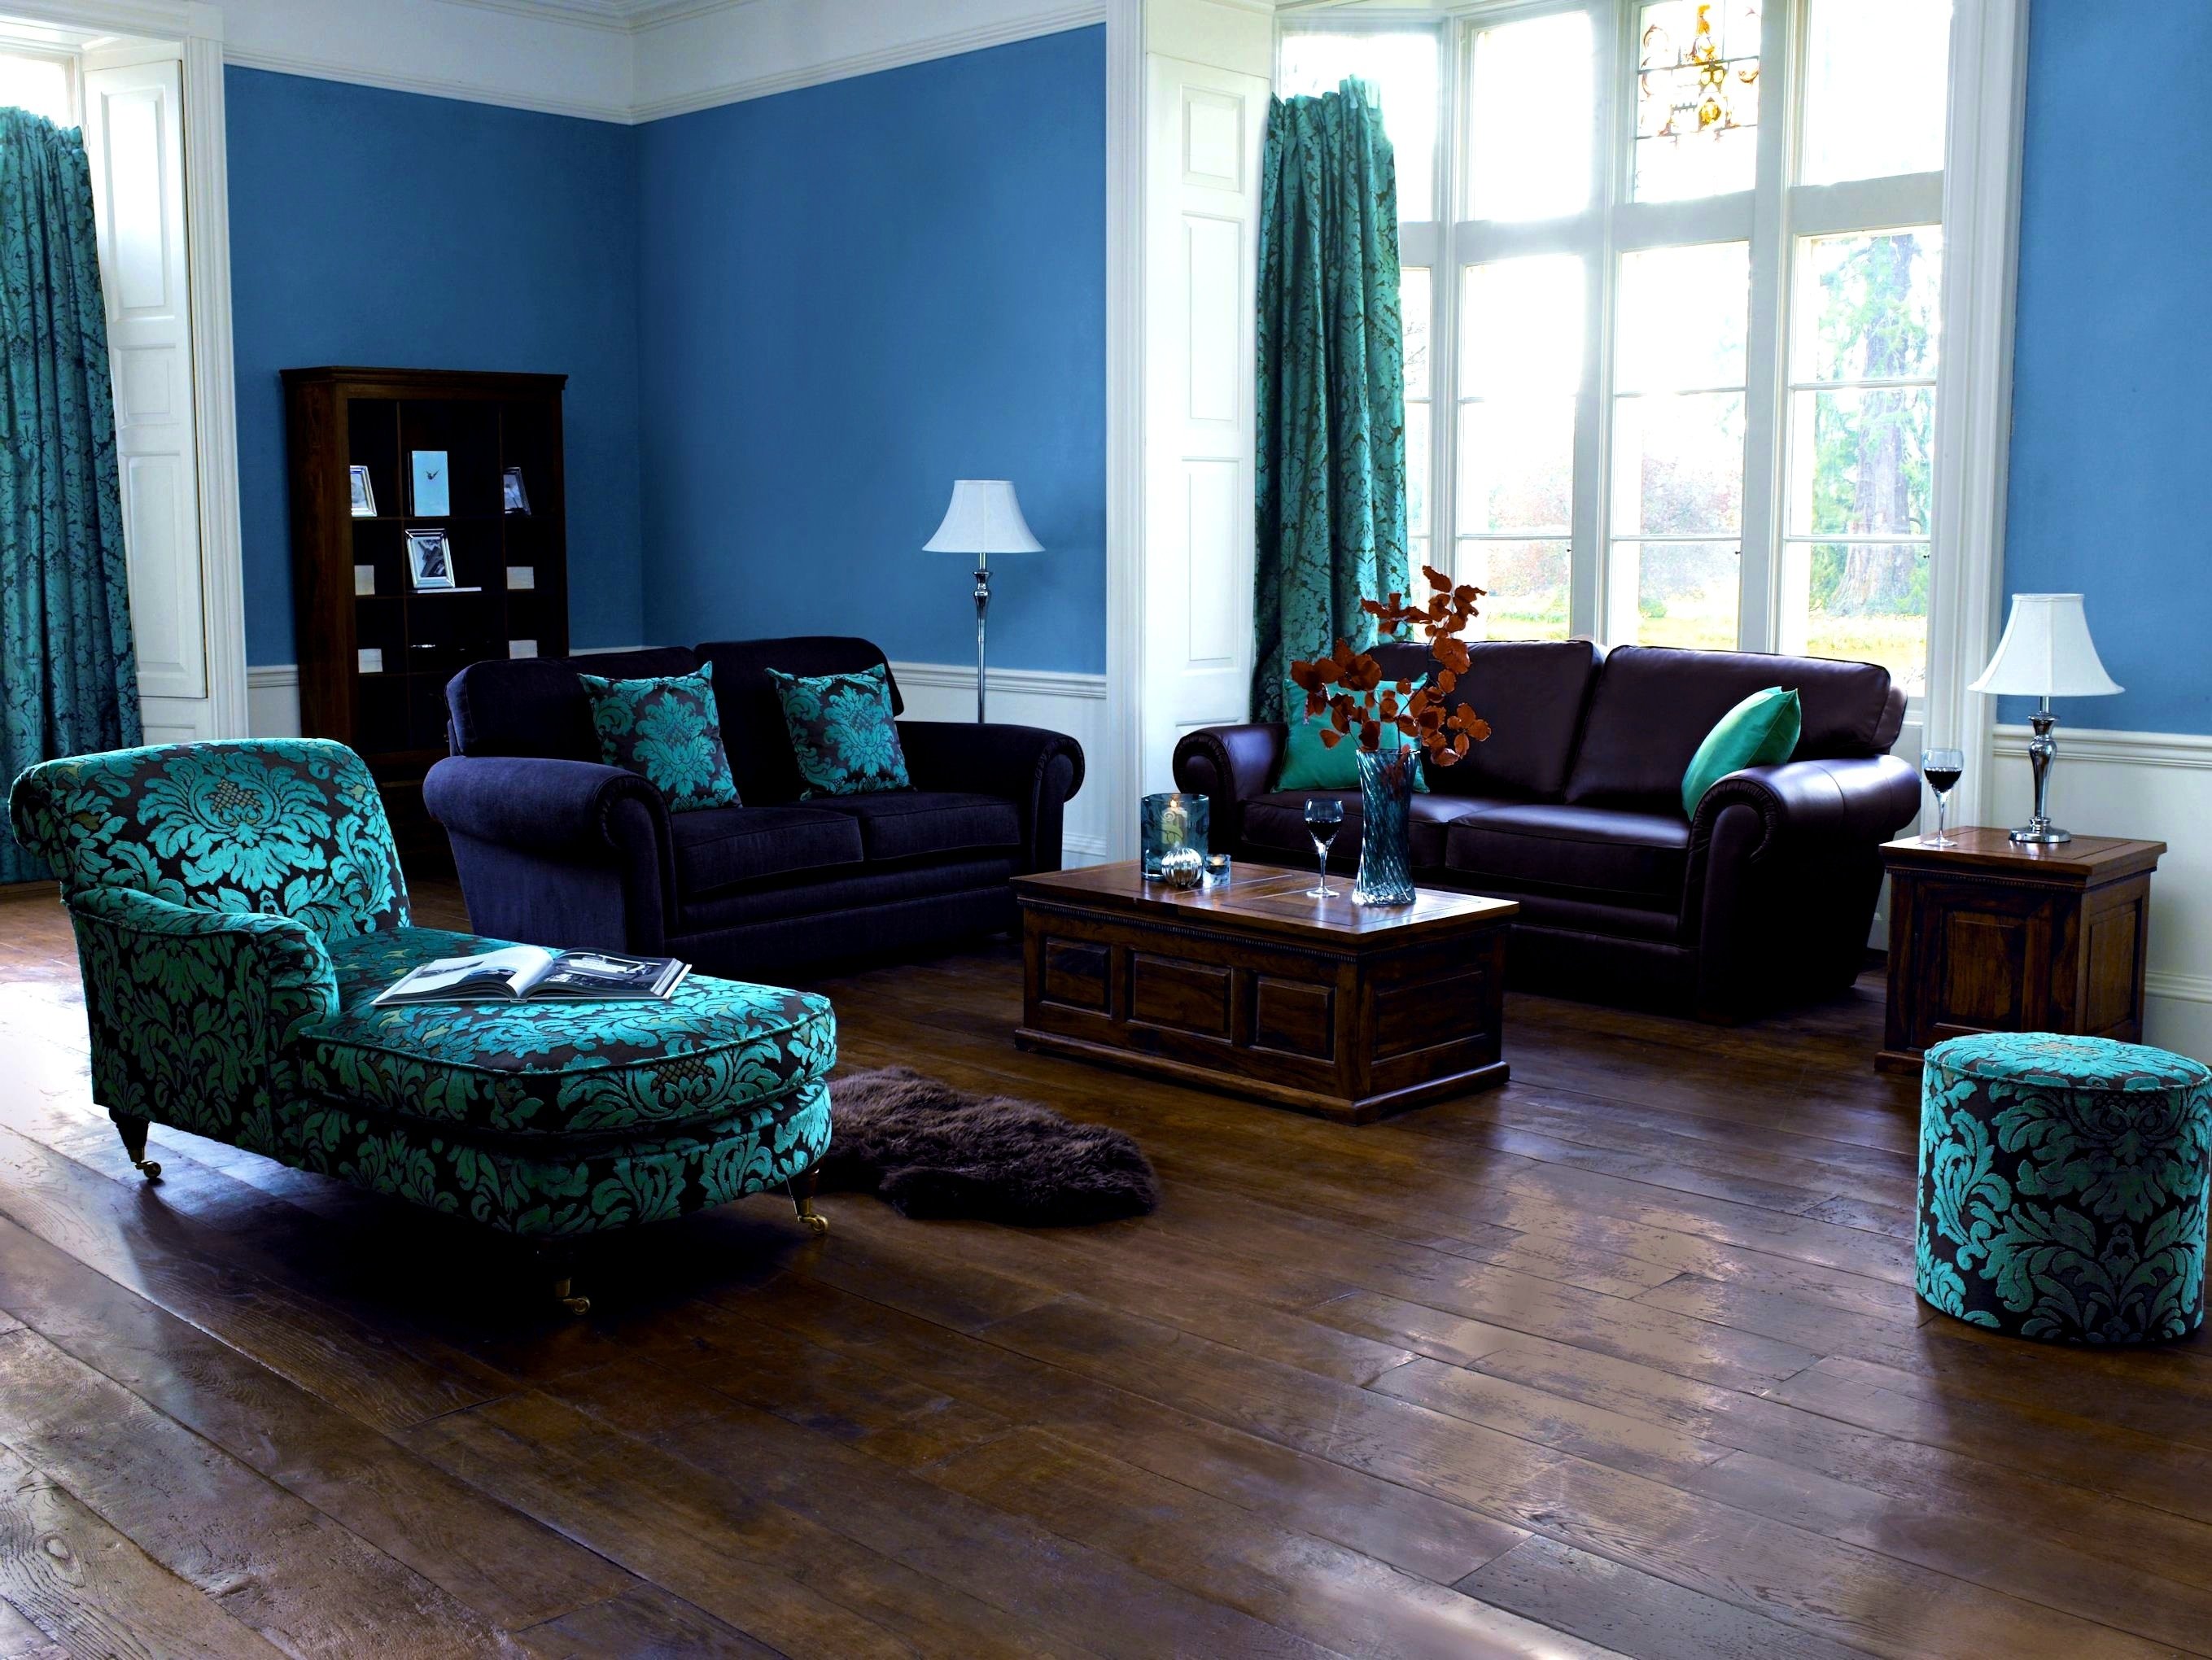 10 Fantastic Brown And Blue Living Room Ideas bedroom licious brown turquoise living room ideas and blue navy 2022